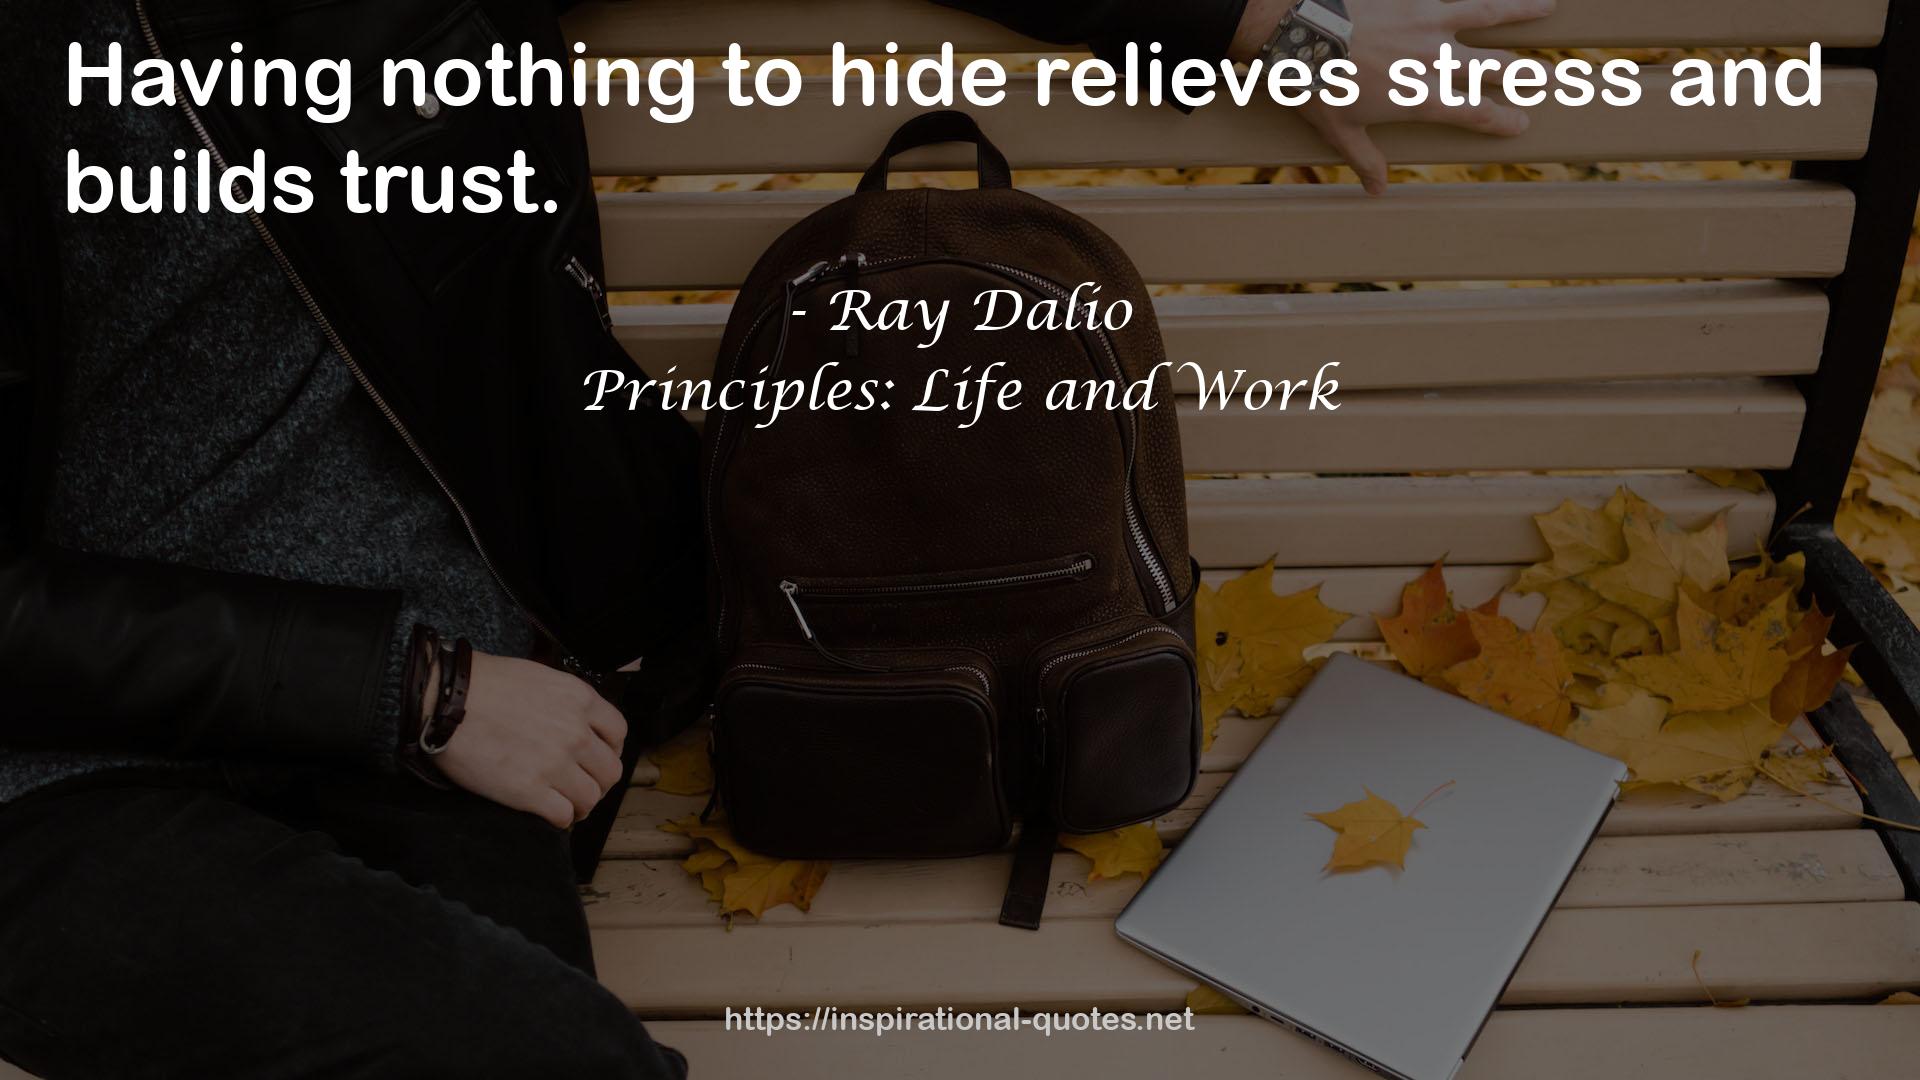 Principles: Life and Work QUOTES